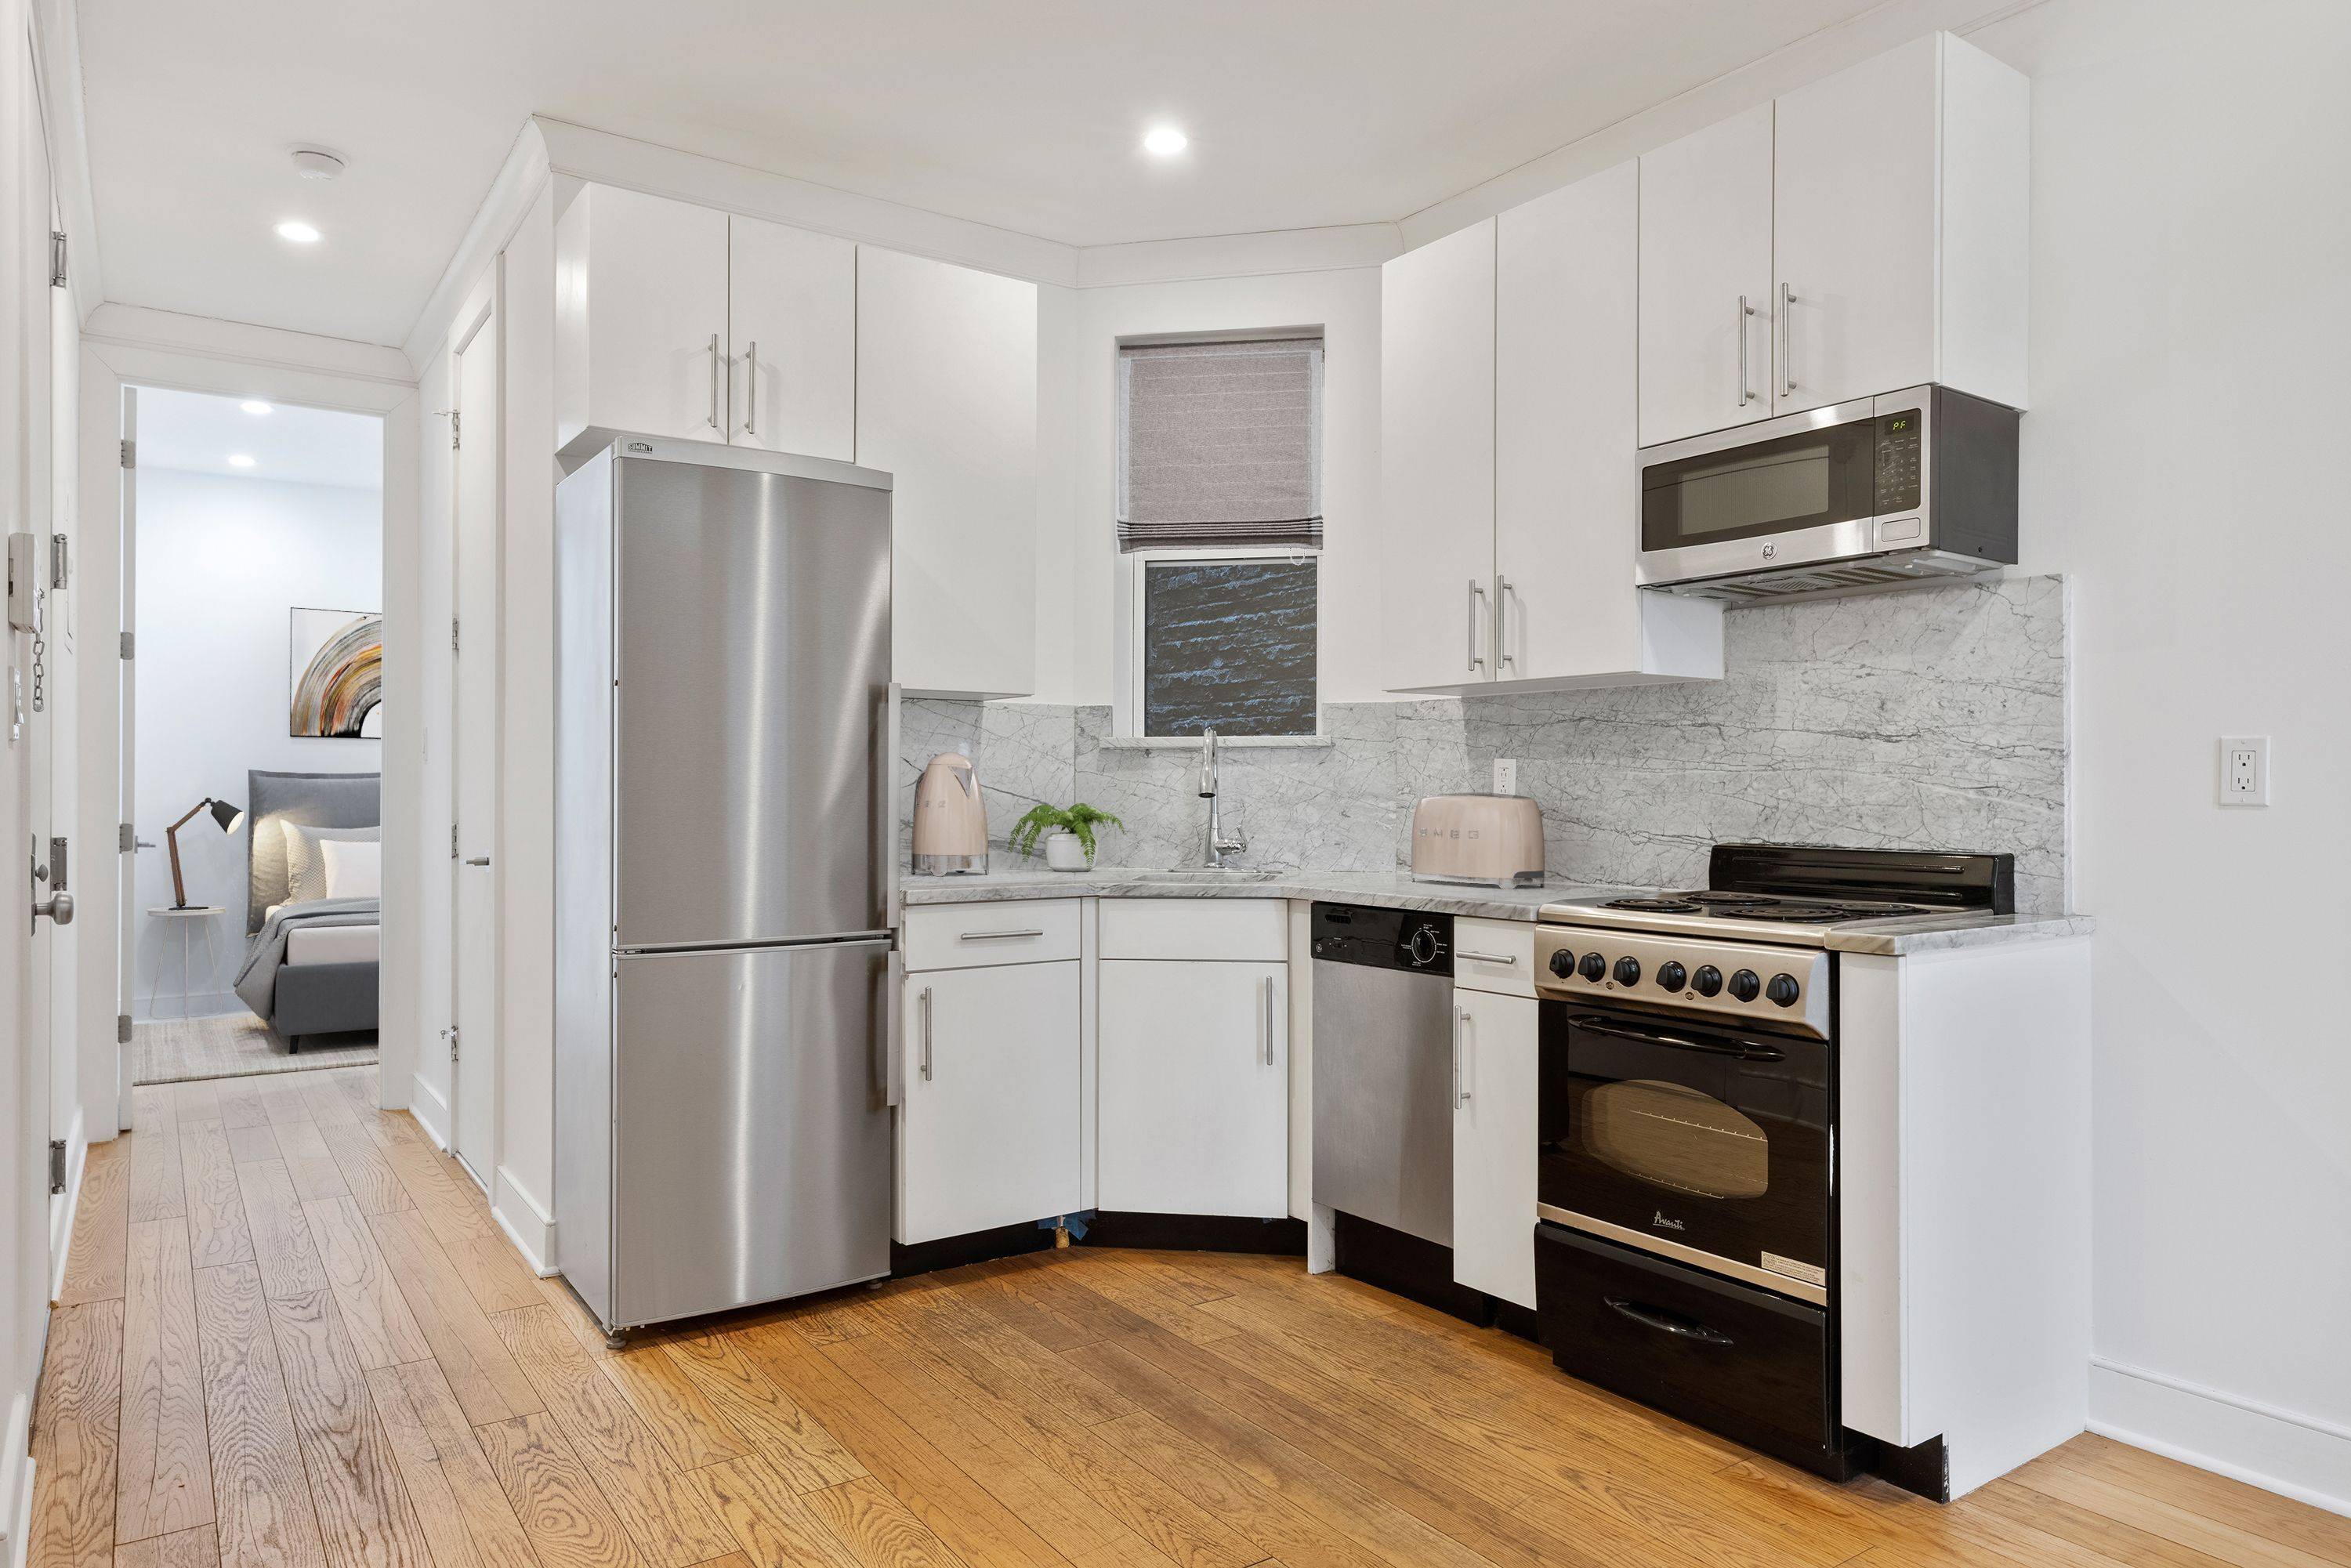 Beautiful 3 bedroom, 1 full bath residence featuring stainless steel appliances, granite countertops, designer details, renovated marble bathrooms with Kohler fixtures and a personal video intercom system.